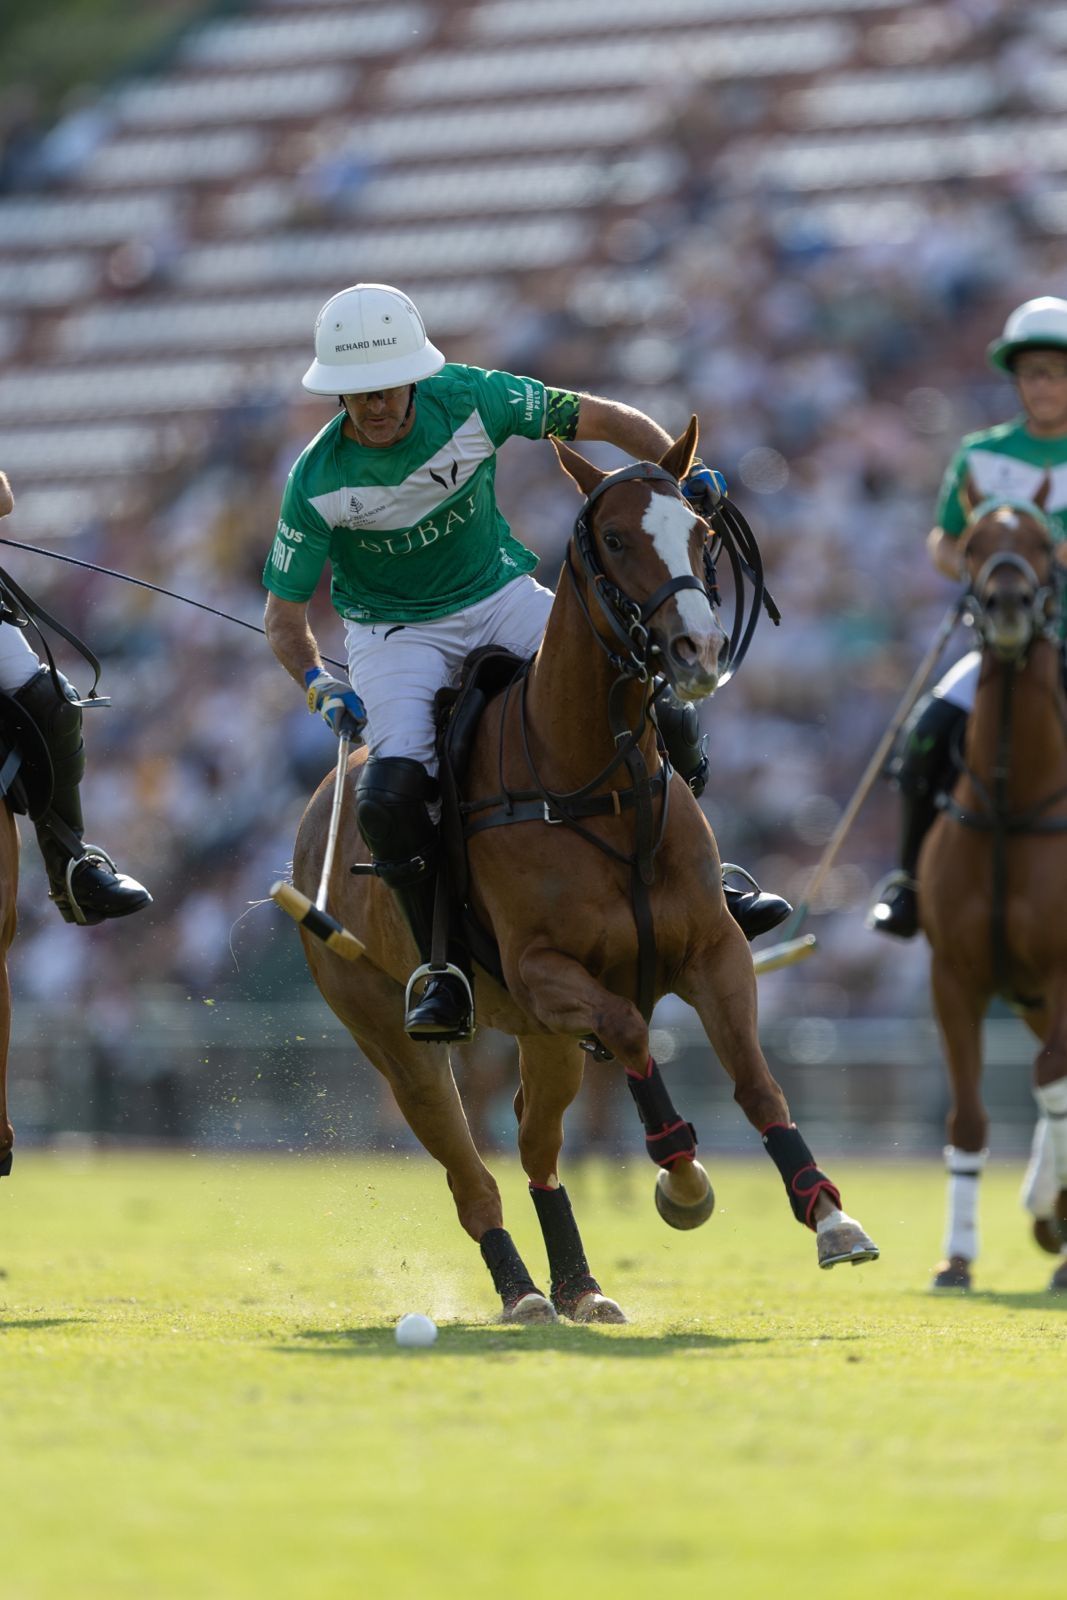 a man is riding a horse while playing polo on a field .